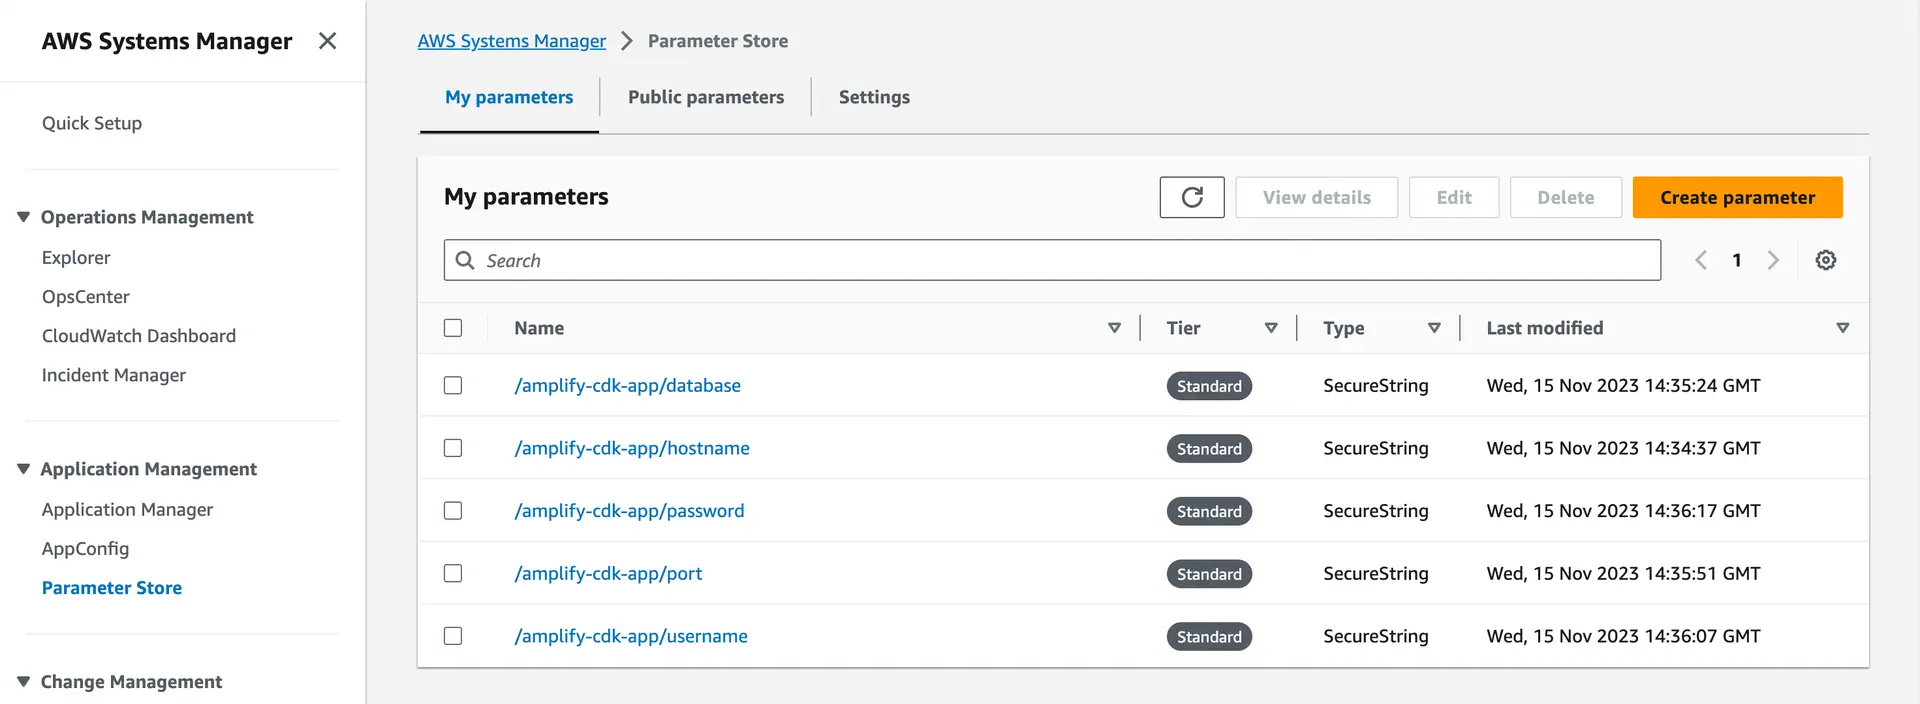 A screenshot of an AWS Systems Manager console page titled "Parameter Store". The page shows a list of parameters with names like "/amplify-cdk-app/username", "/amplify-cdk-app/password", and "/amplify-cdk-app/hostname" indicating database connection details. Each parameter is of Tier "Standard" and typed as "SecureString". The last modified date is displayed for each parameter.